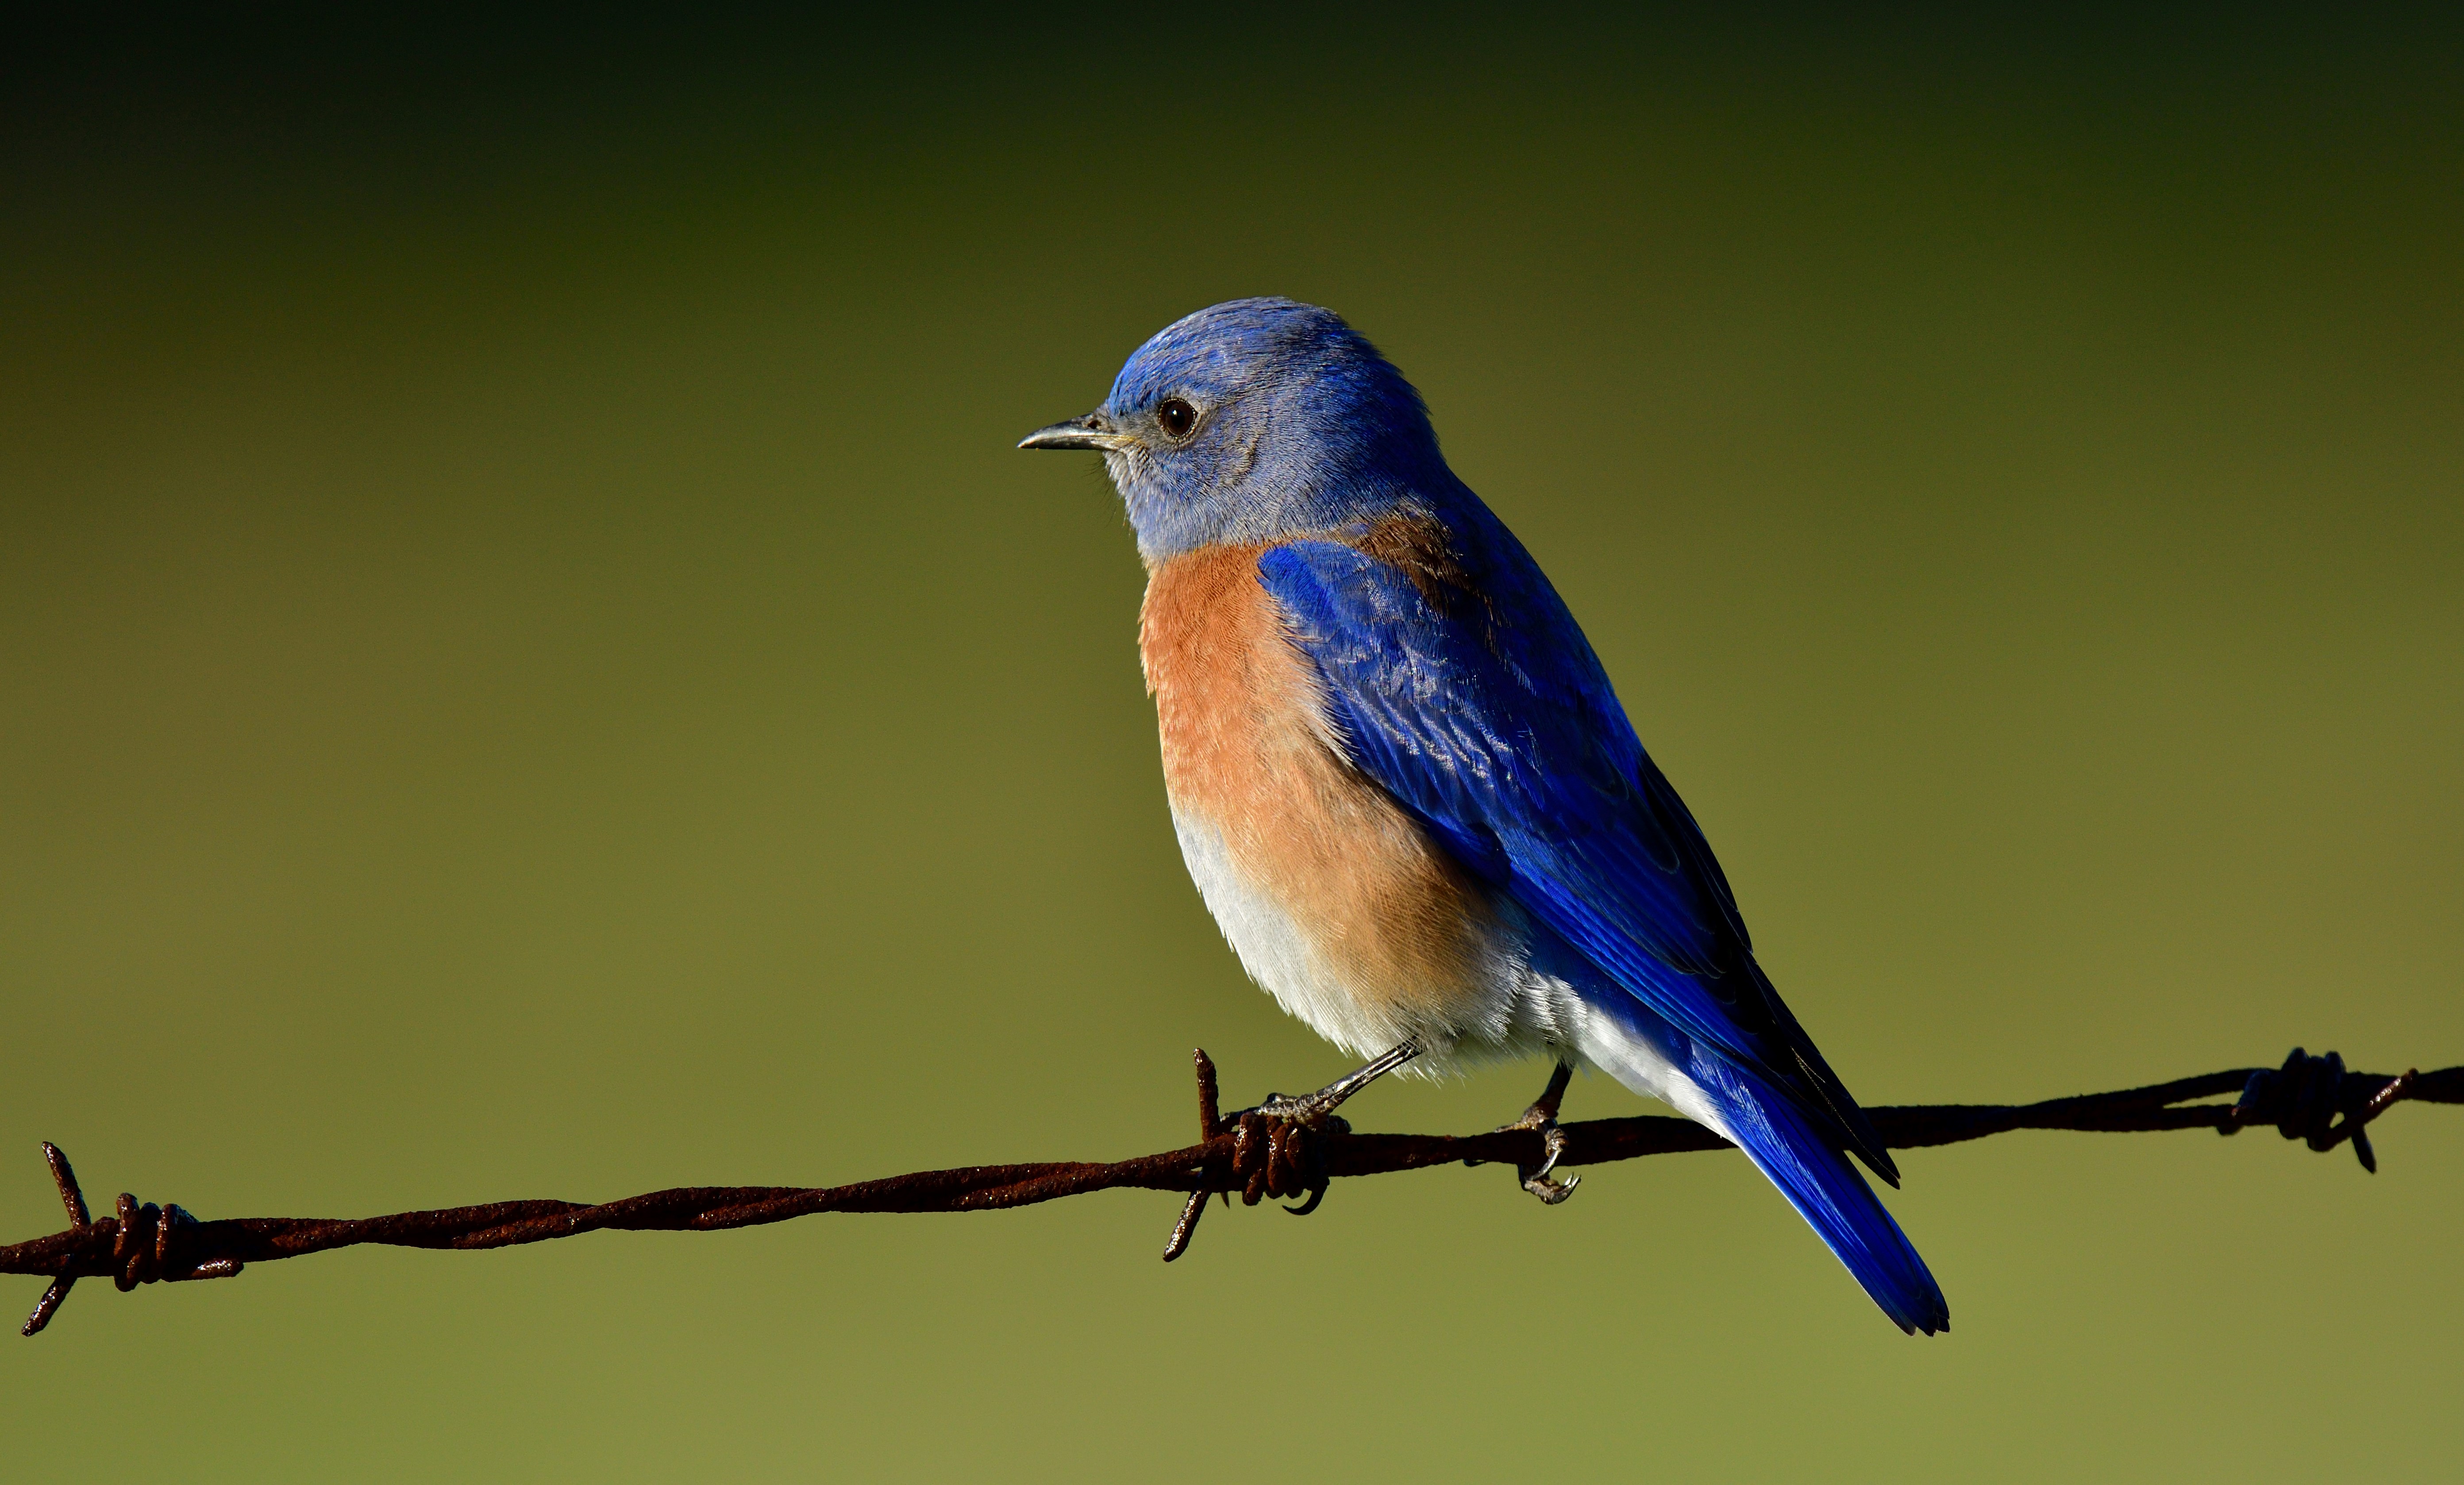 A western bluebird is illuminated by the morning sun as it sits on a sits on a wire fence at a park in Livermore, CA.